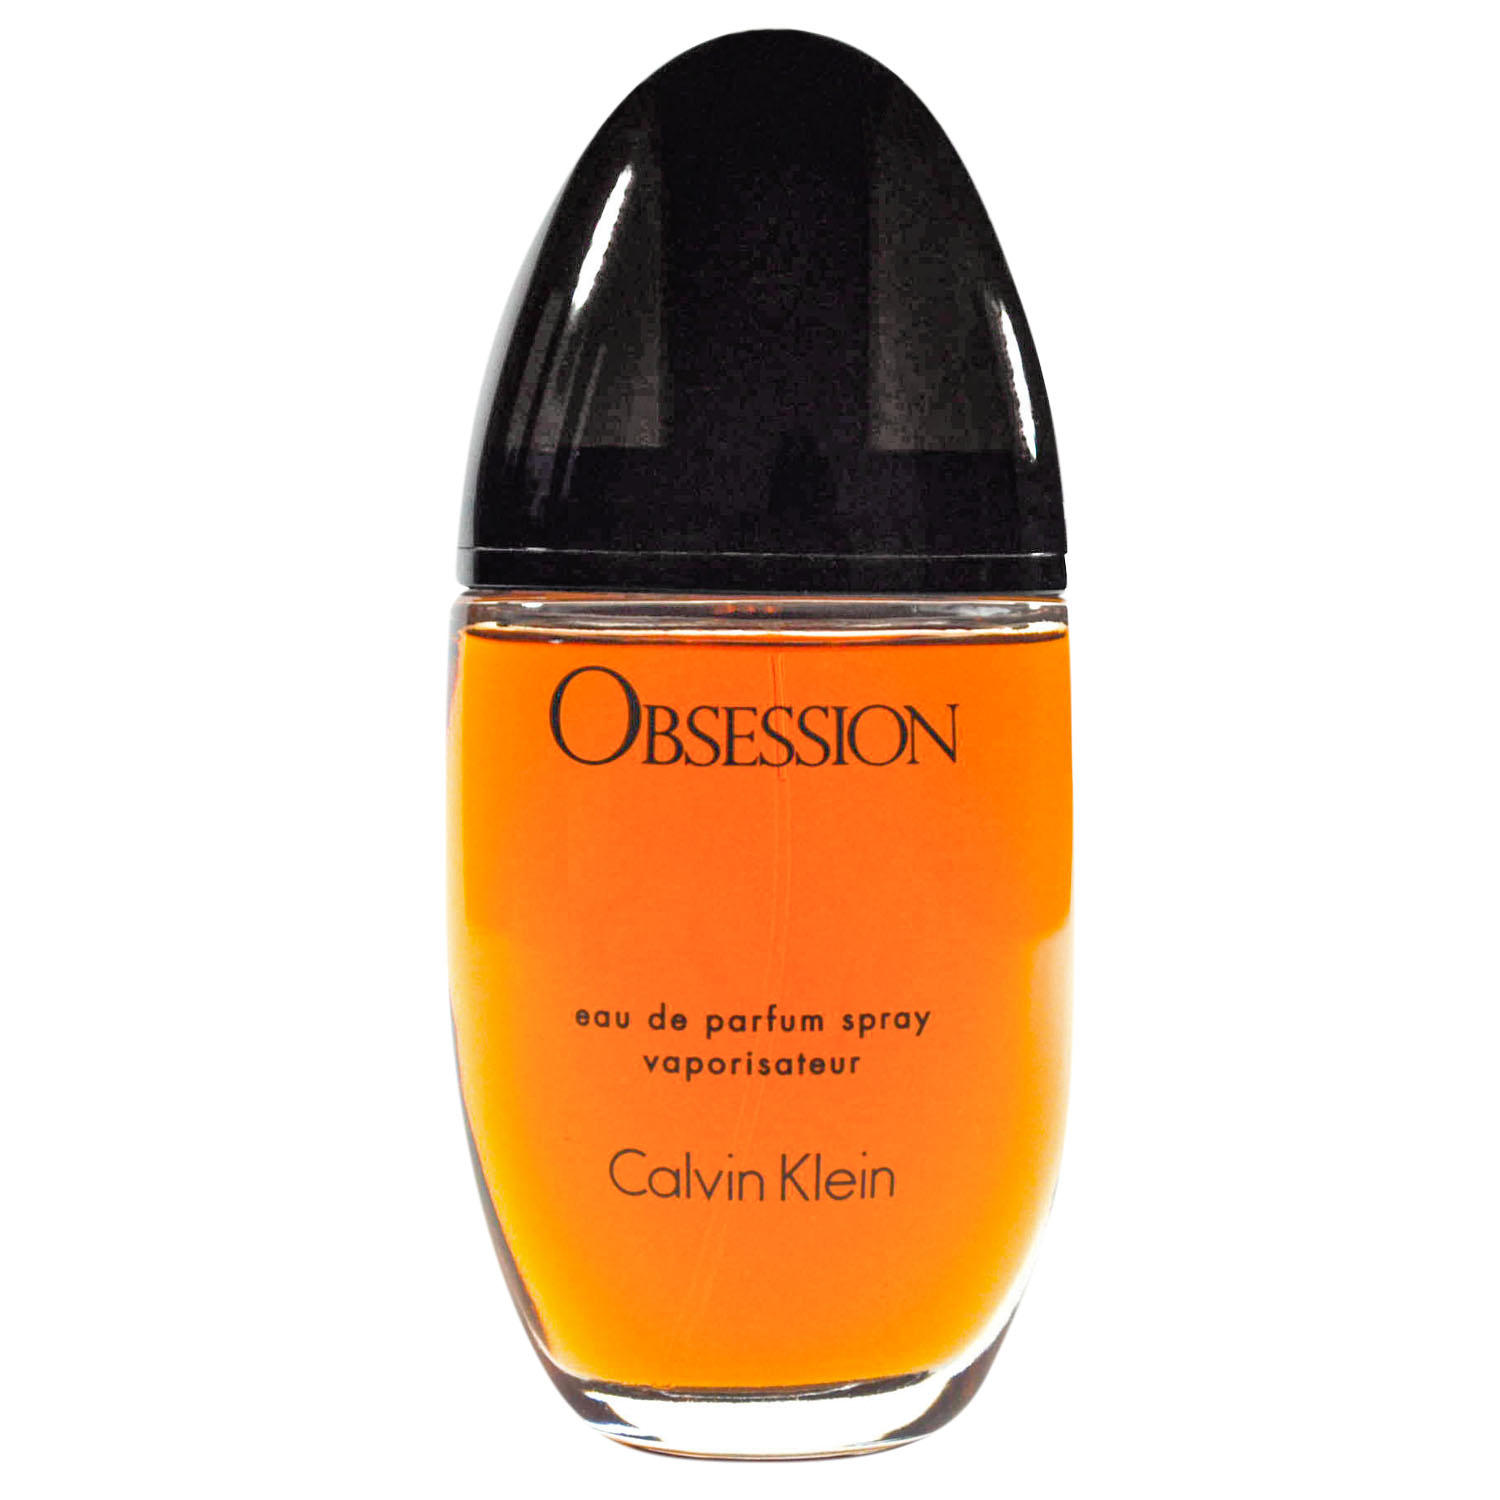 Obsession for Women by Calvin Klein – 1.0 oz.